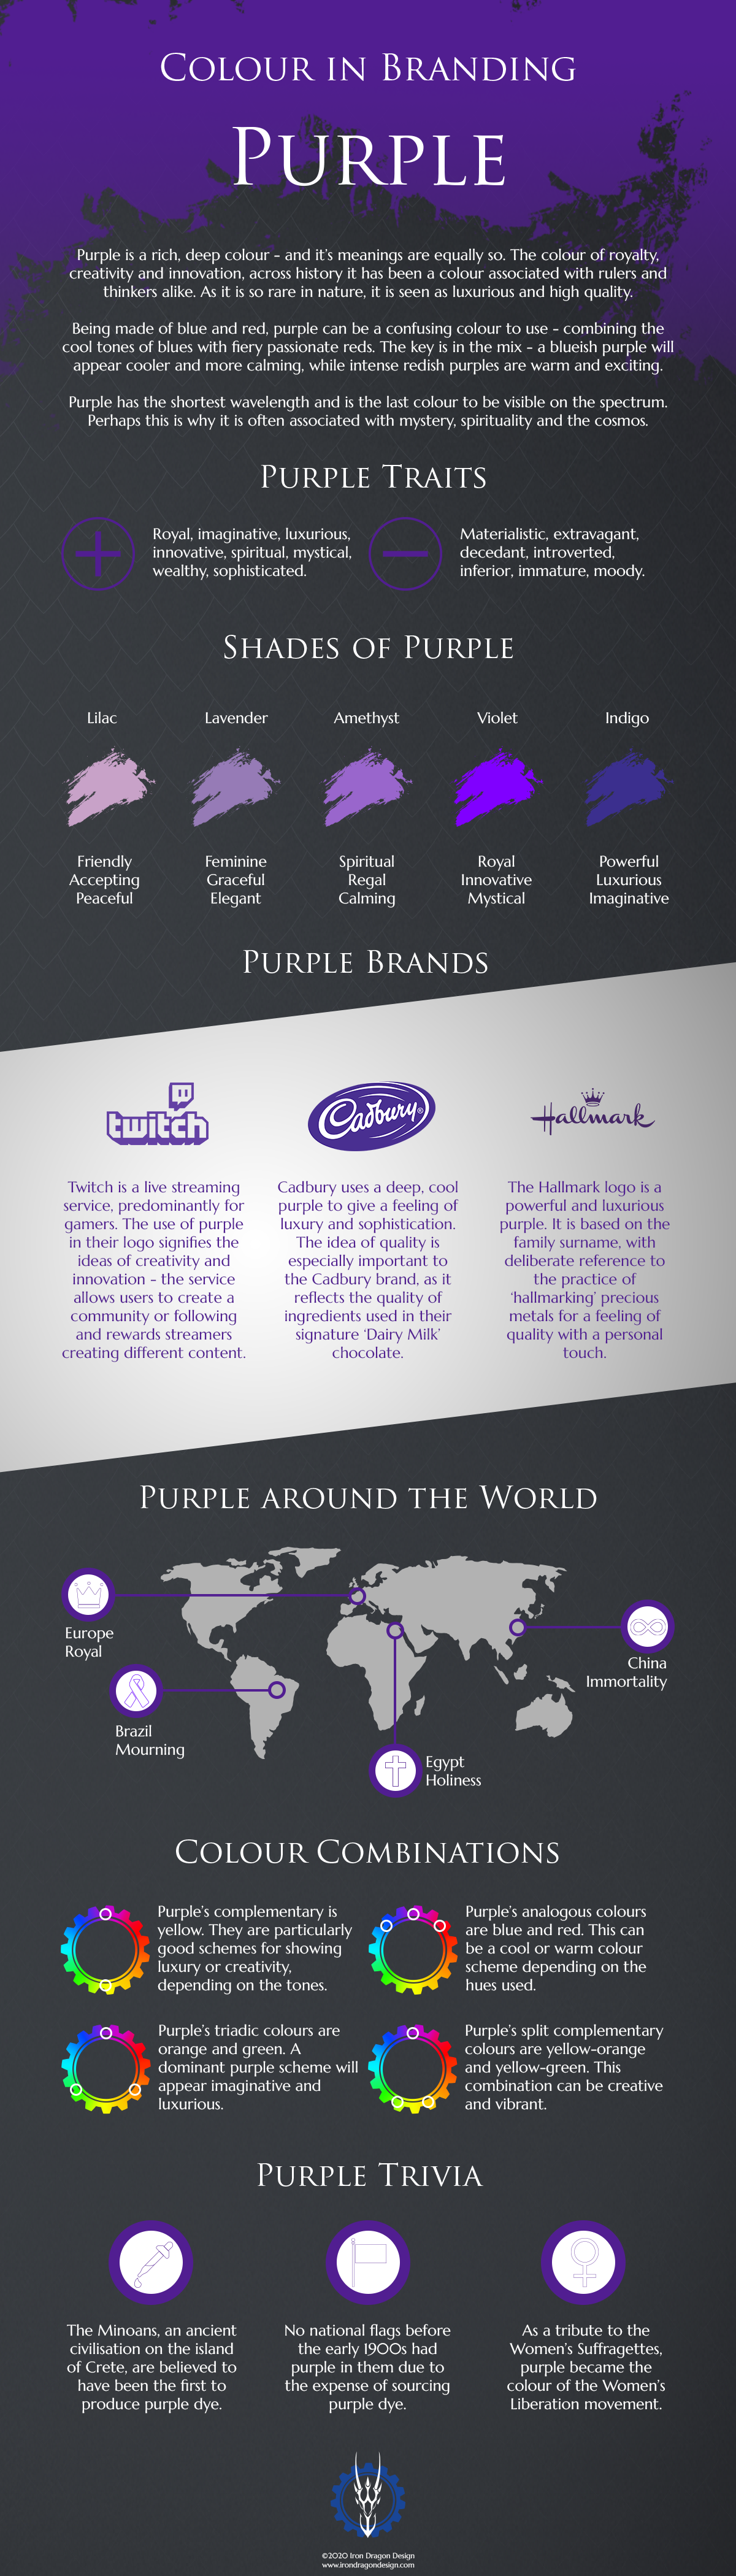 Purple Logo: The power of purple color in designing